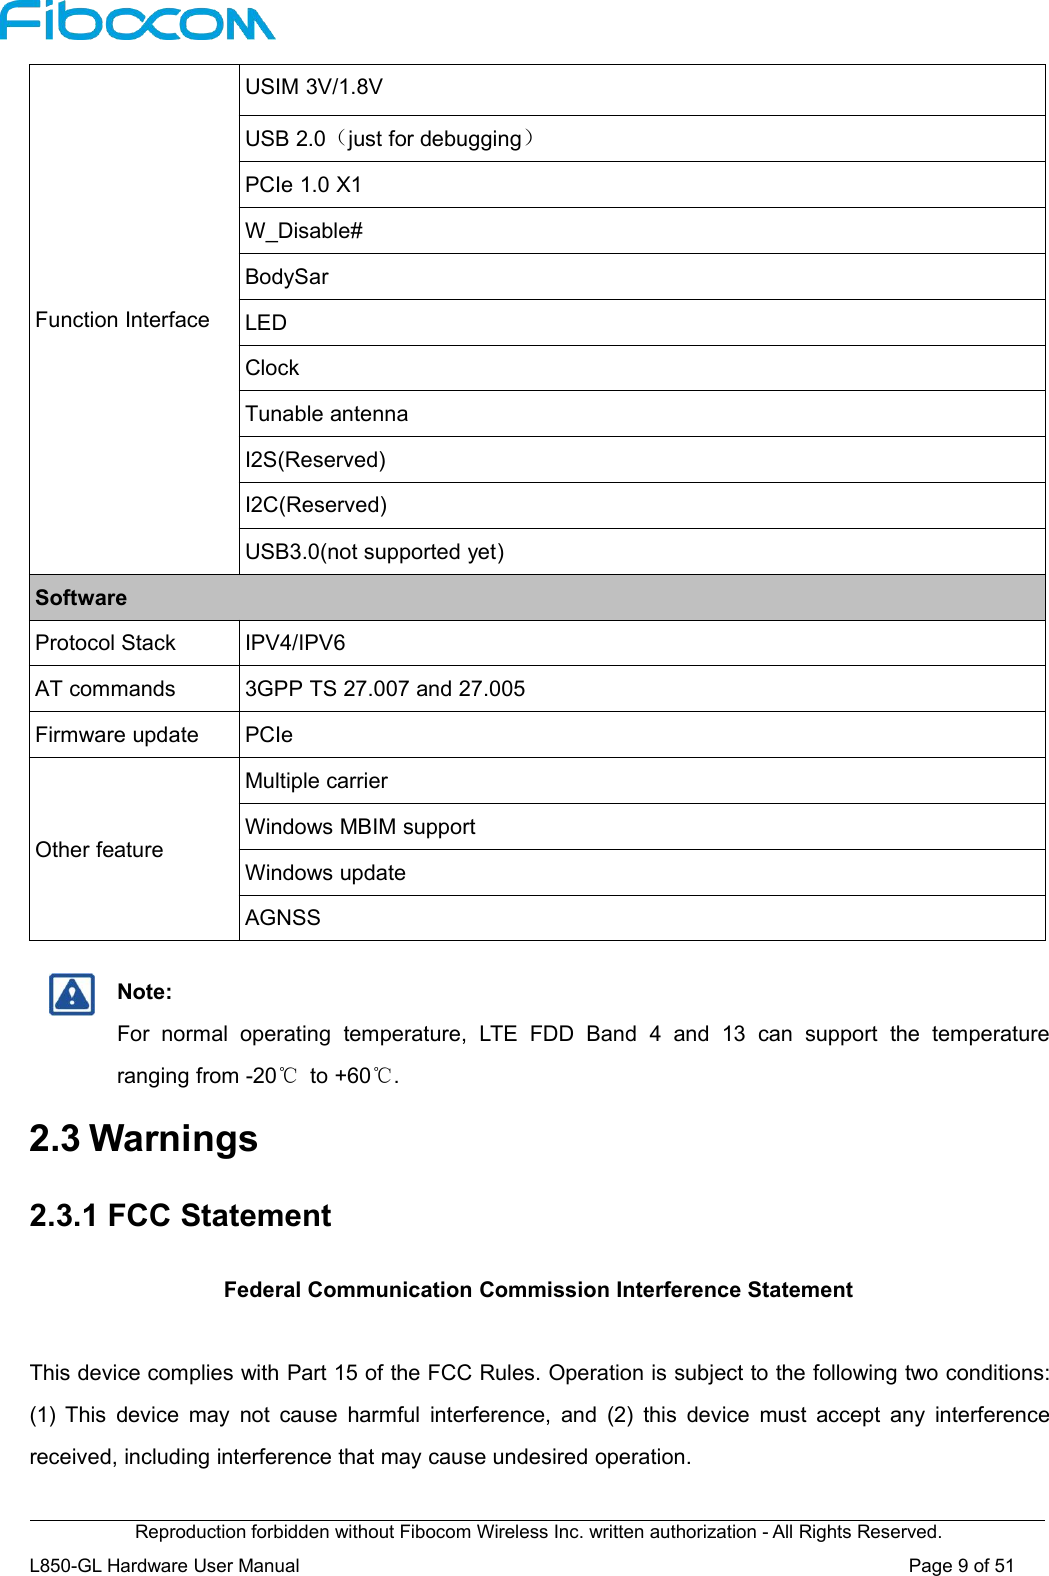 Reproduction forbidden without Fibocom Wireless Inc. written authorization - All Rights Reserved.L850-GL Hardware User Manual Page9of51Function InterfaceUSIM 3V/1.8VUSB 2.0（just for debugging）PCIe 1.0 X1W_Disable#BodySarLEDClockTunable antennaI2S(Reserved)I2C(Reserved)USB3.0(not supported yet)SoftwareProtocol StackIPV4/IPV6AT commands3GPP TS 27.007 and 27.005Firmware updatePCIeOther featureMultiple carrierWindows MBIM supportWindows updateAGNSSNote:For normal operating temperature, LTE FDD Band 4 and 13 can support the temperatureranging from -20℃to +60℃.2.3 Warnings2.3.1 FCC StatementFederal Communication Commission Interference StatementThis device complies with Part 15 of the FCC Rules. Operation is subject to the following two conditions:(1) This device may not cause harmful interference, and (2) this device must accept any interferencereceived, including interference that may cause undesired operation.